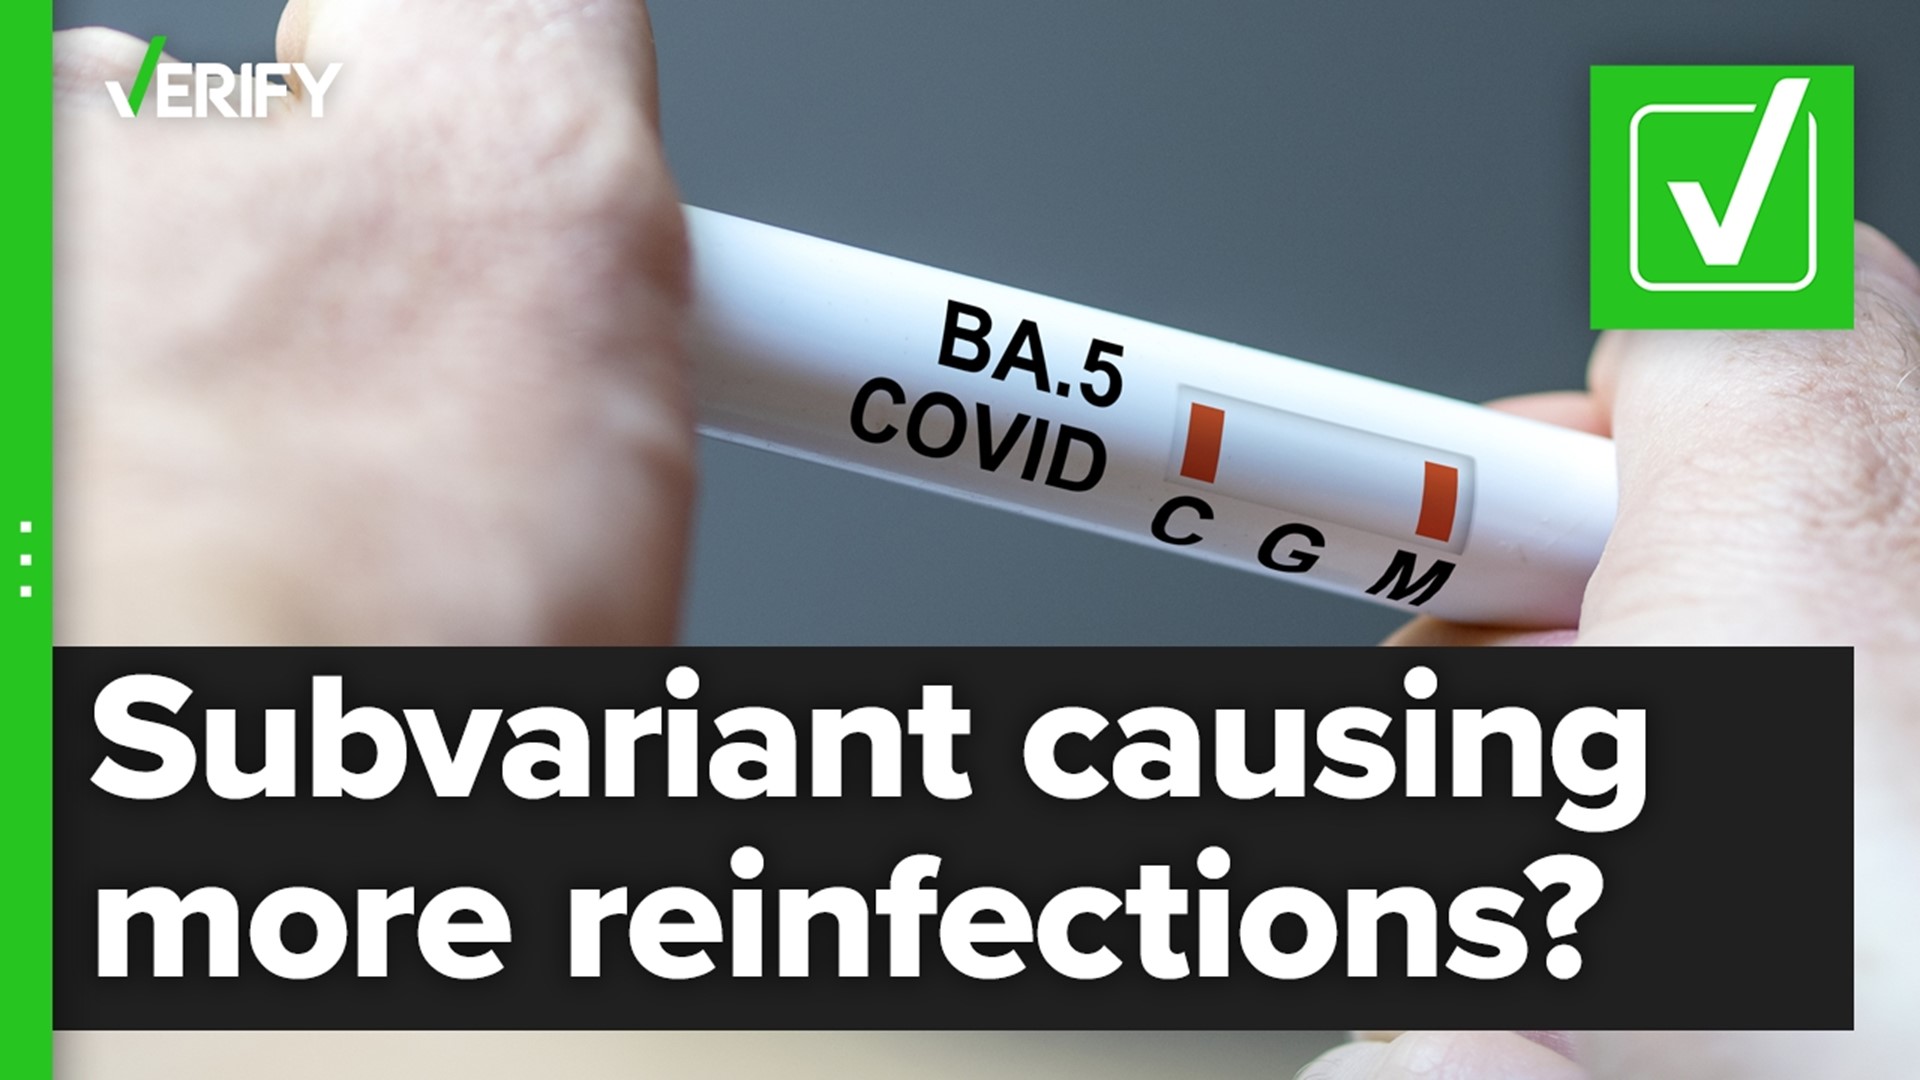 BA.5 is now the dominant COVID-19 subvariant in the United States. Here’s why it’s capable of causing more reinfections, according to experts.